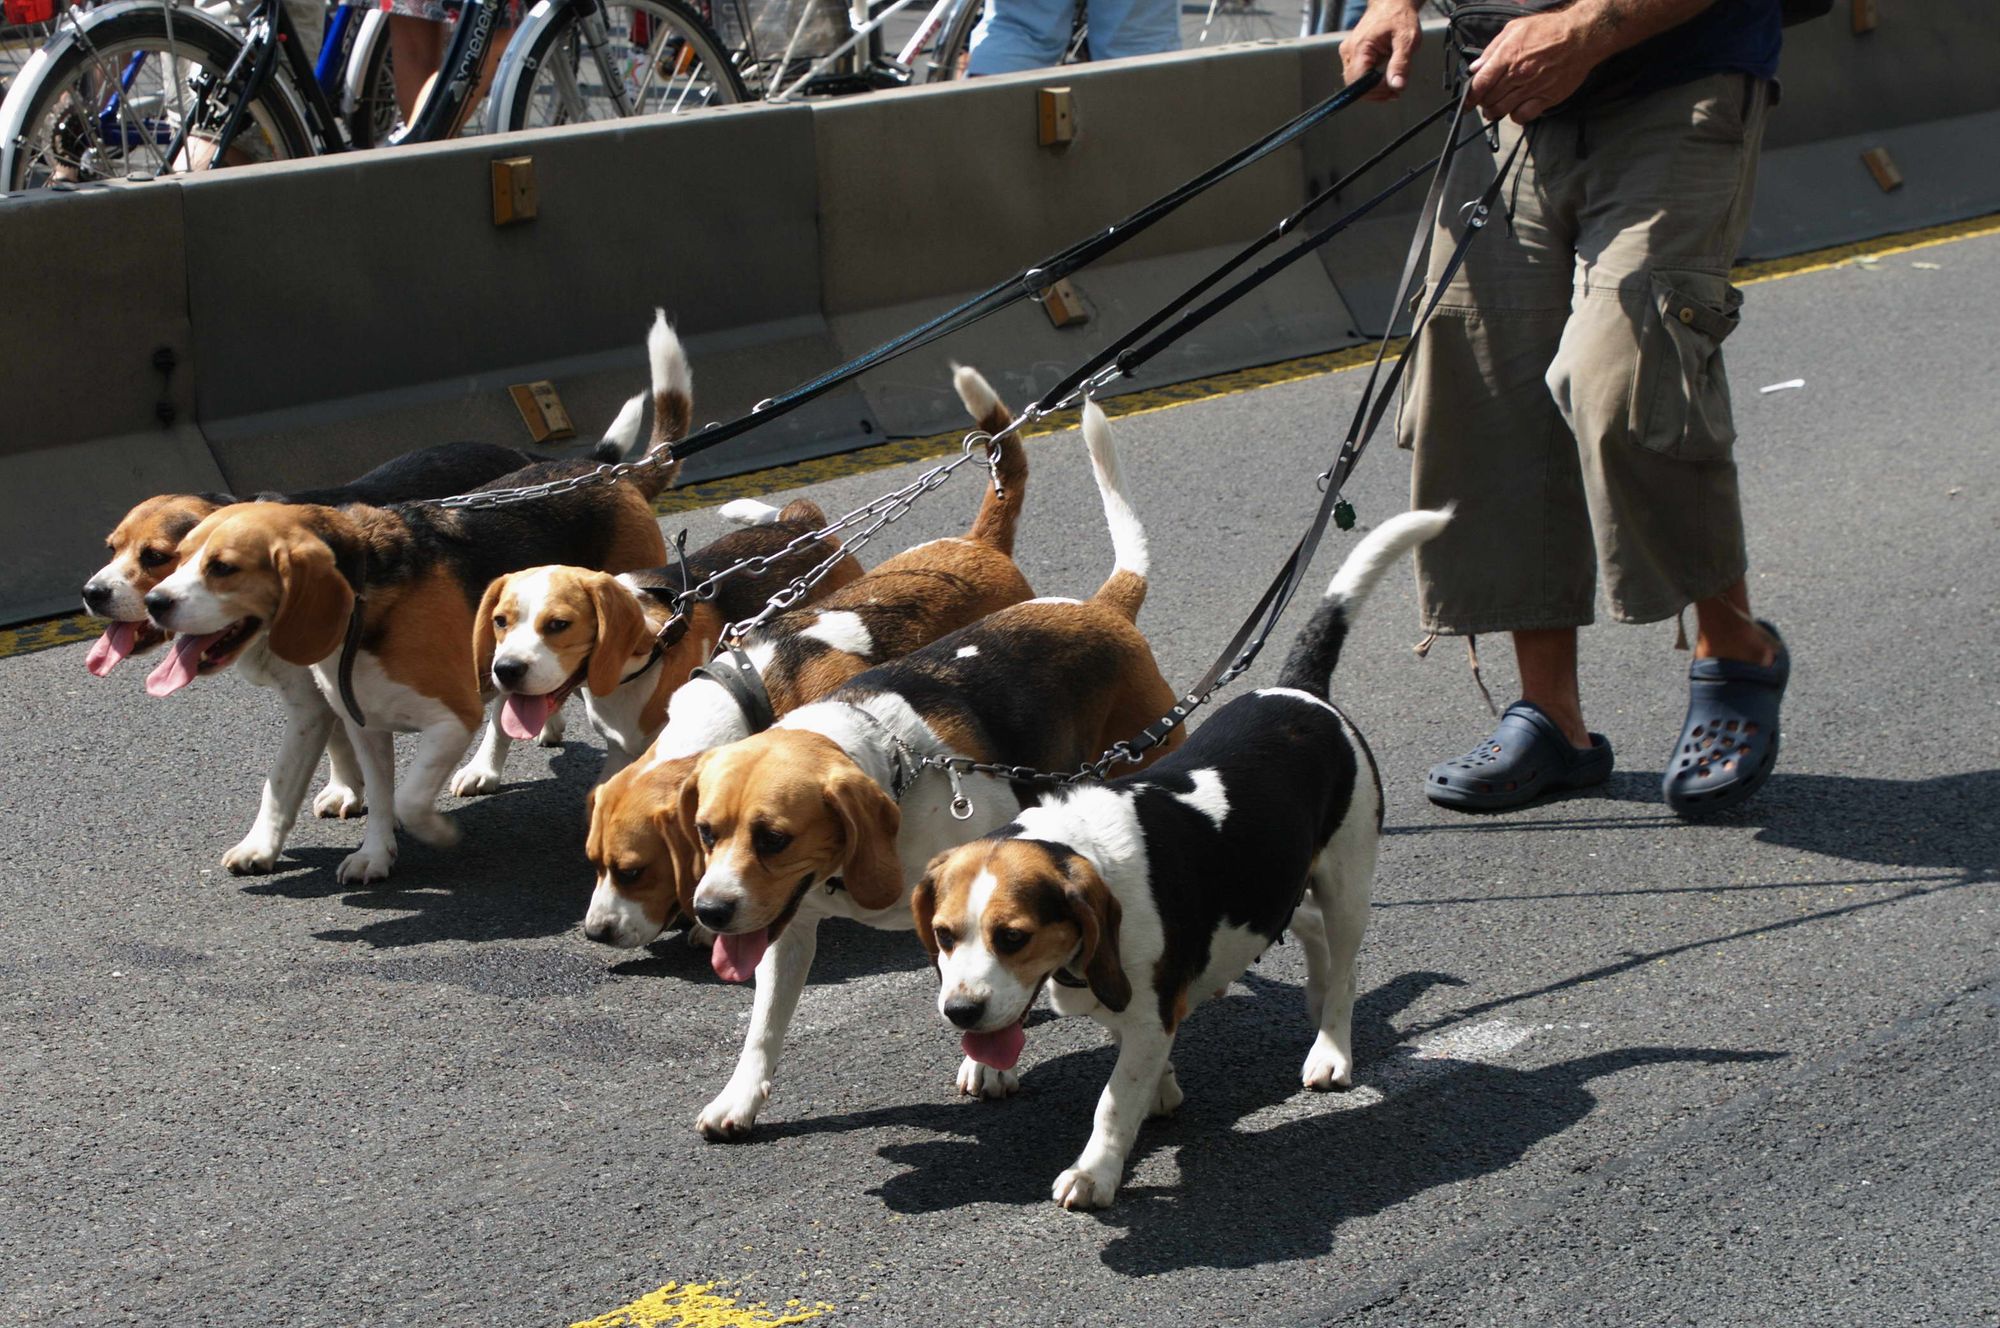 where do beagles come from